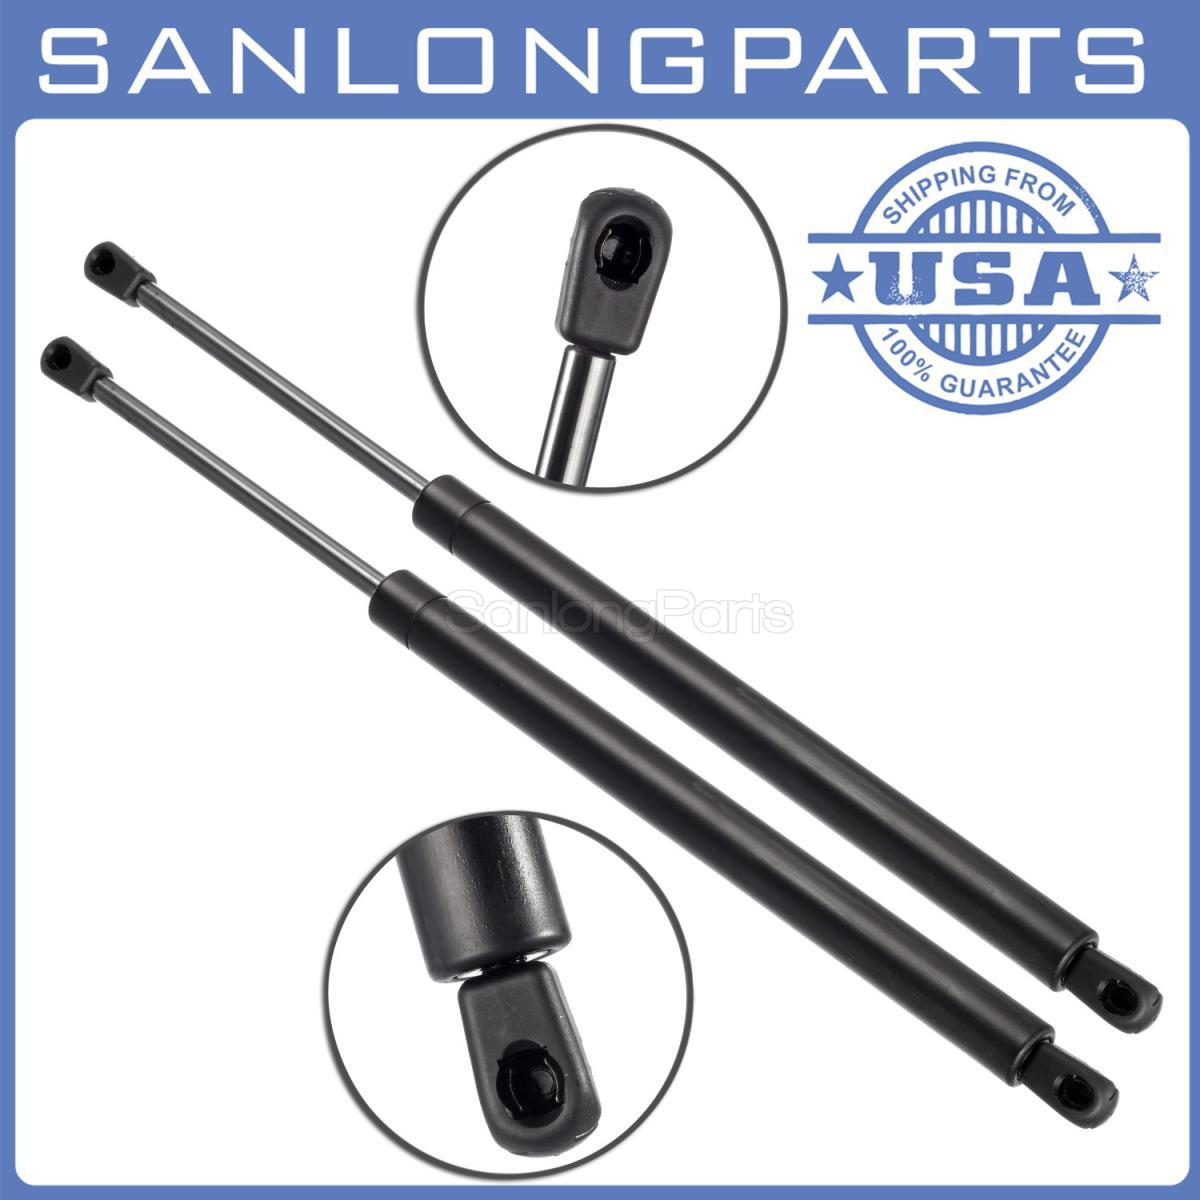 2 pcs Rear Hatch Tailgate Lift Supports Struts Shocks For 02-07 Saturn Vue